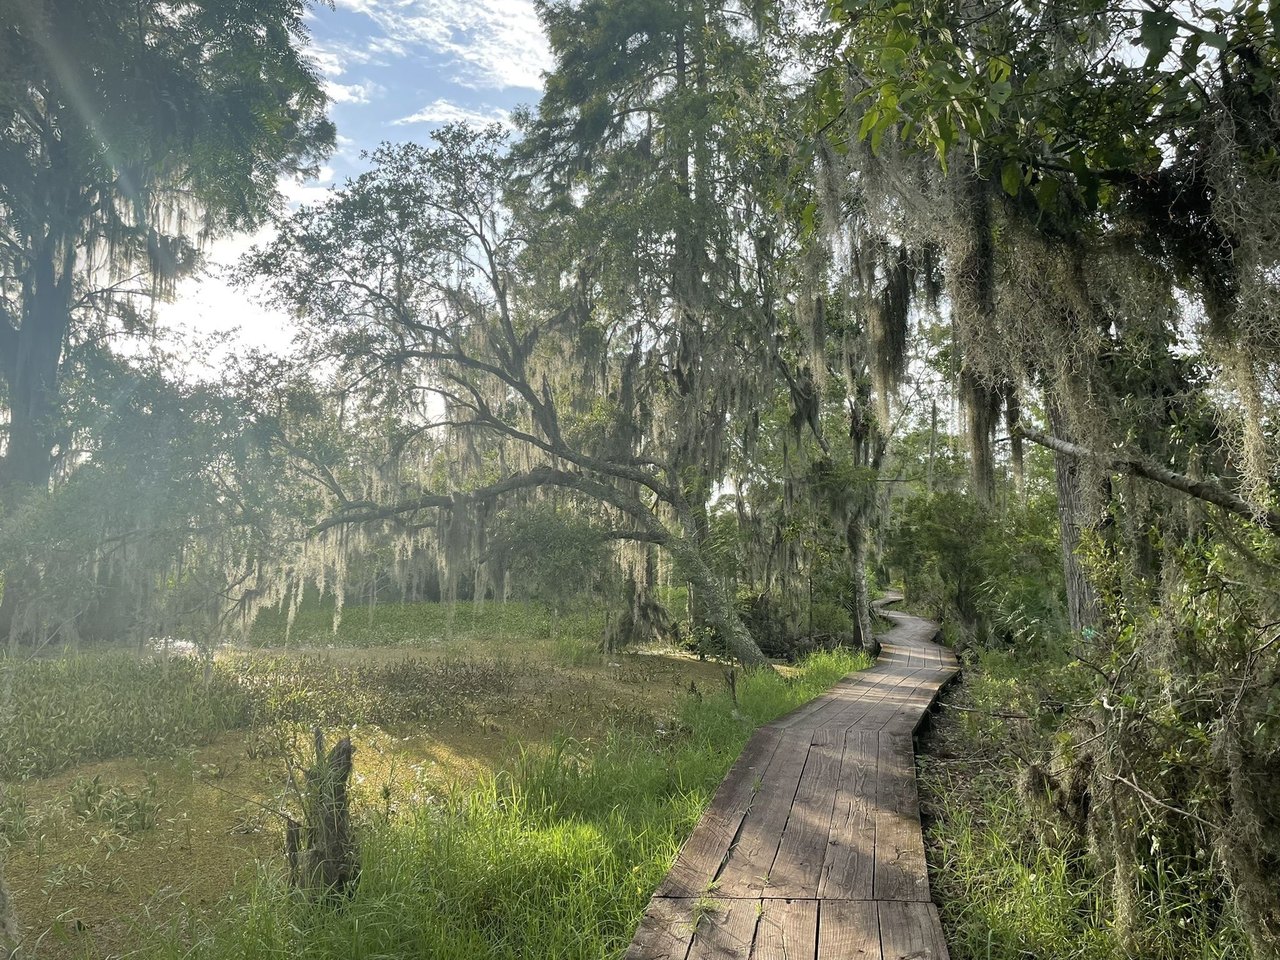 The Bayou Coquille Trail Near New Orleans Is A 1-Mile Scenic Hike